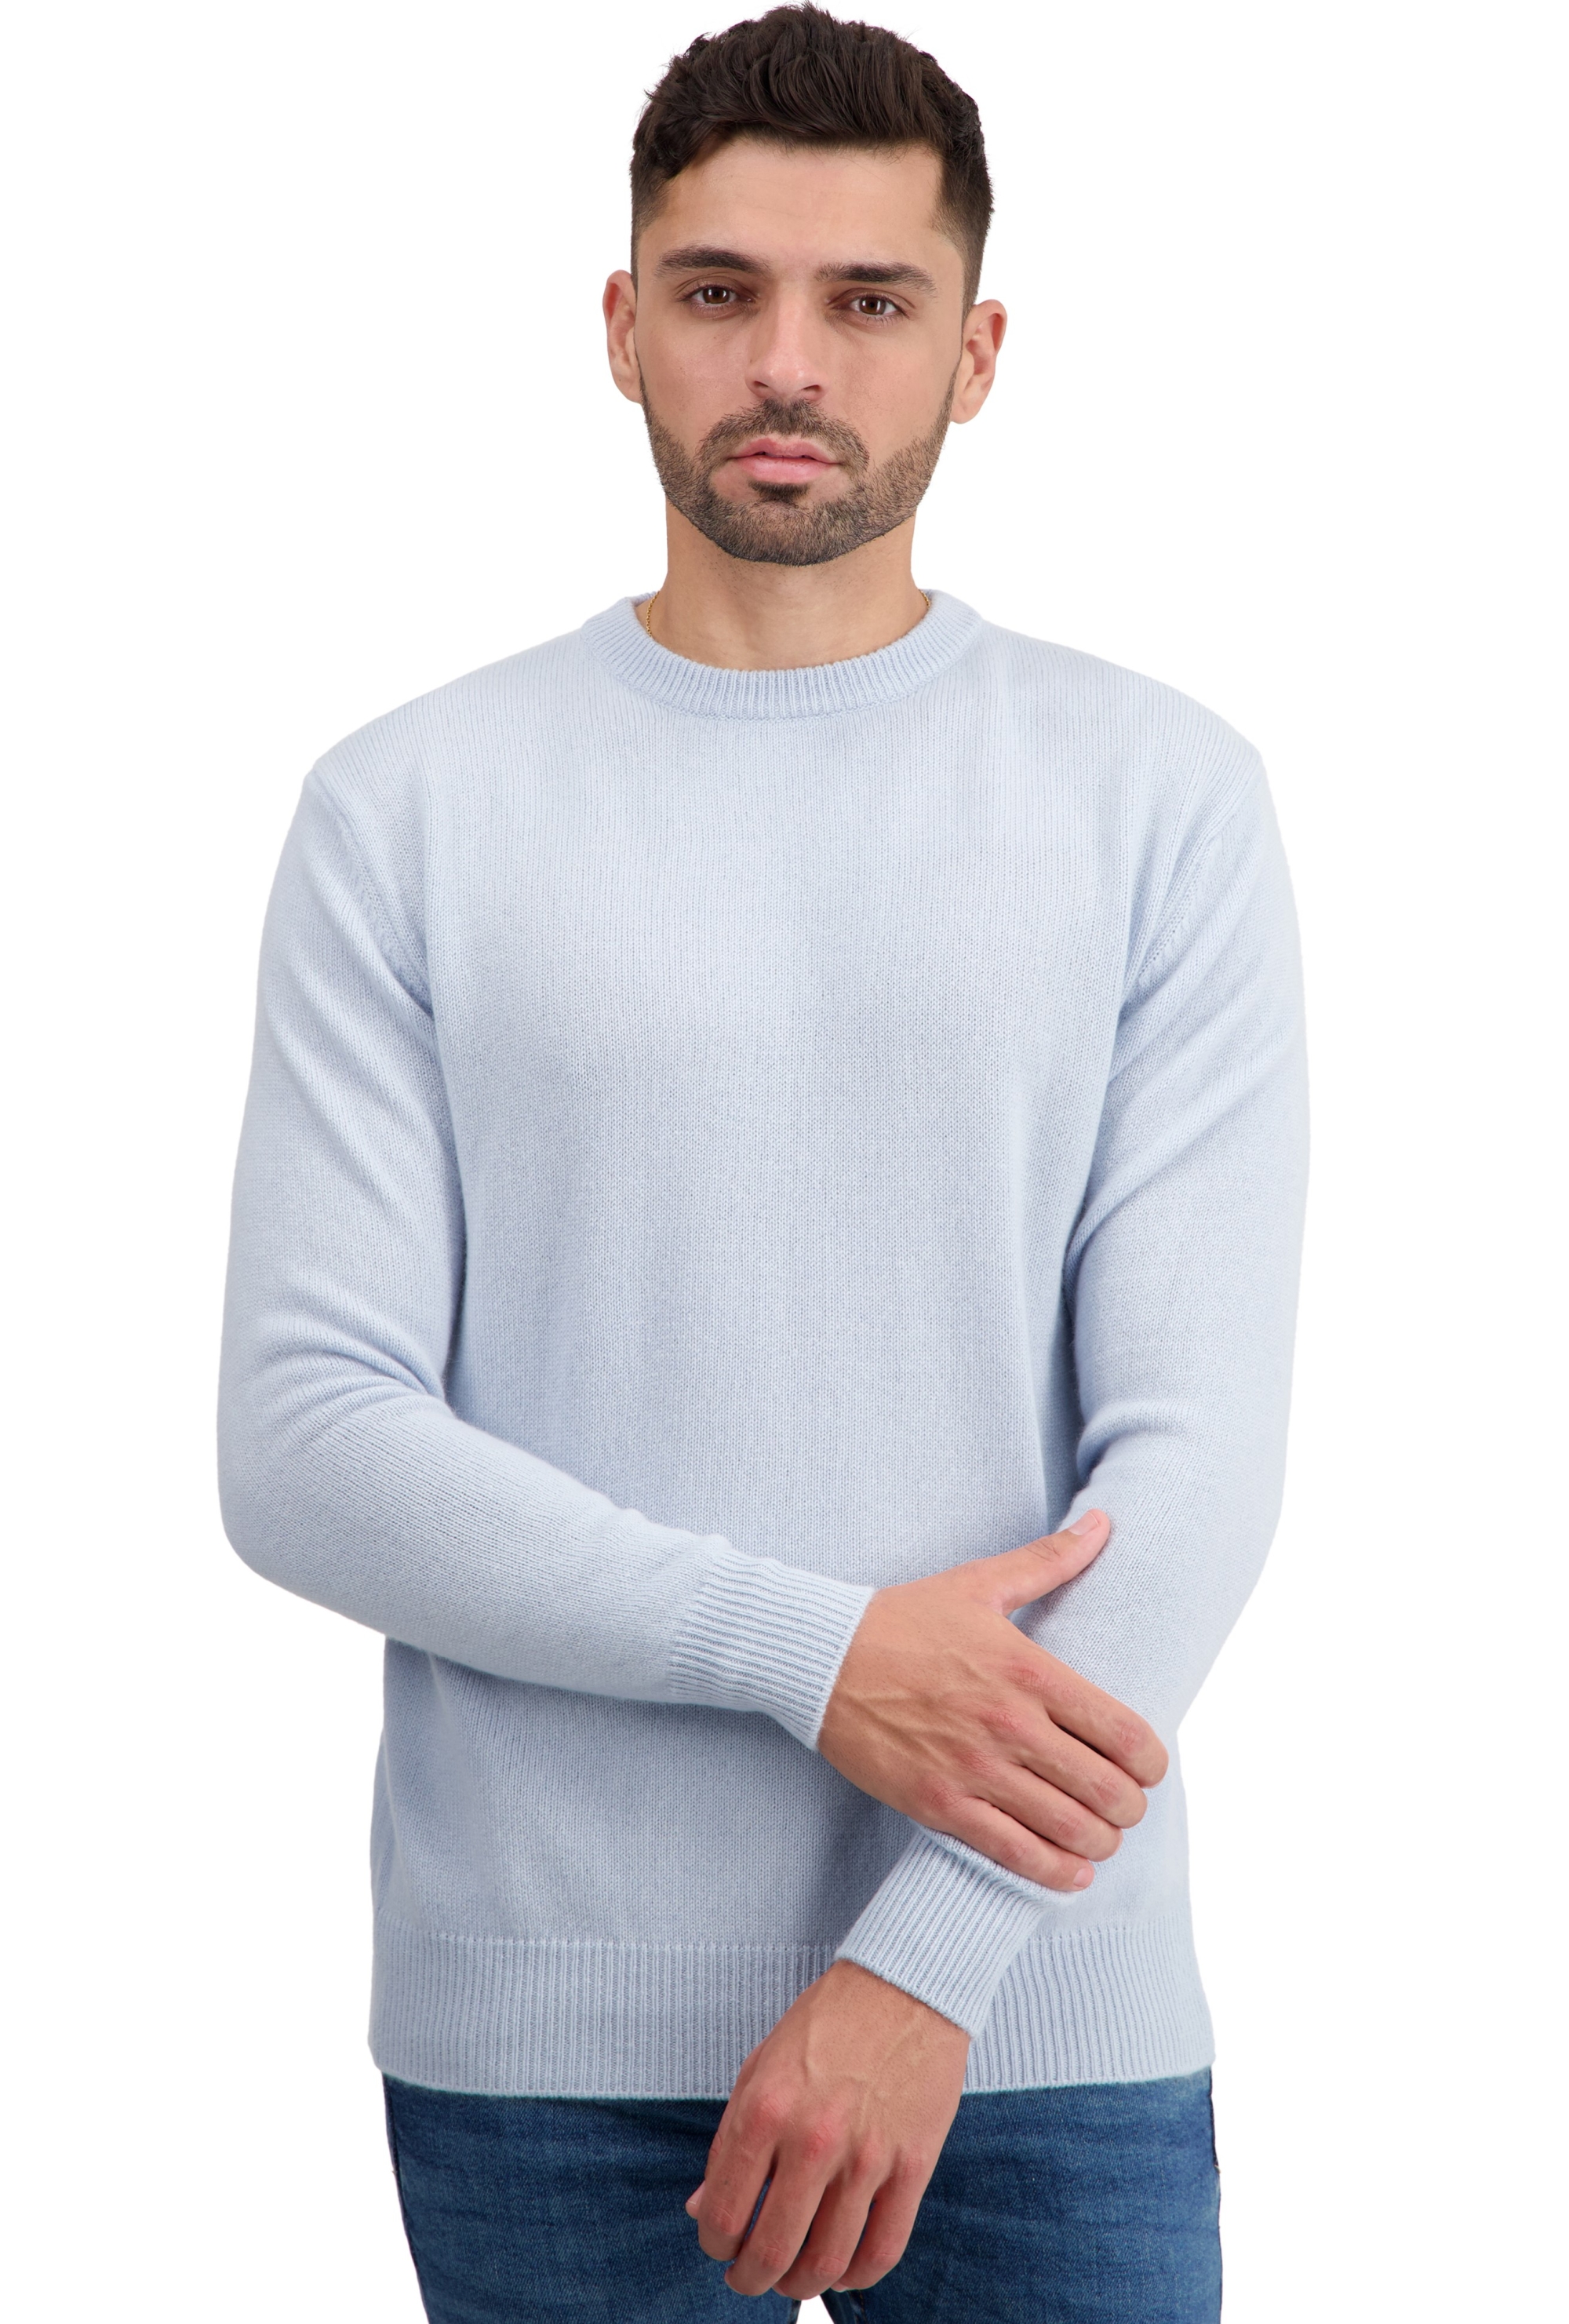 Cashmere men basic sweaters at low prices touraine first whisper m